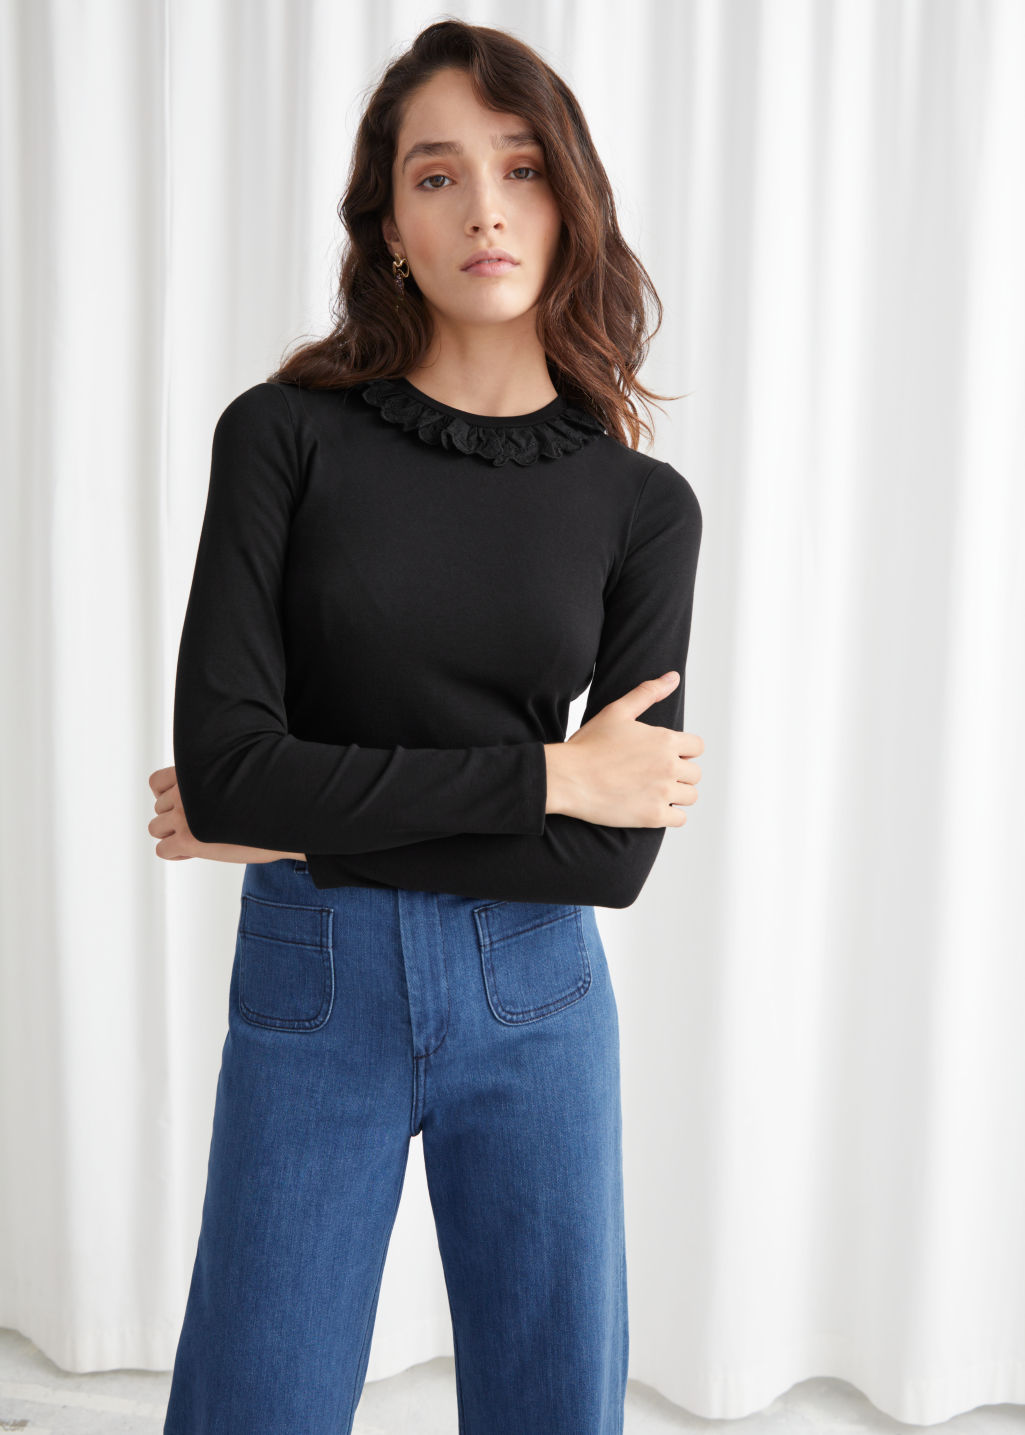 Ruffled Collar Top - Black - Tops & T-shirts - & Other Stories